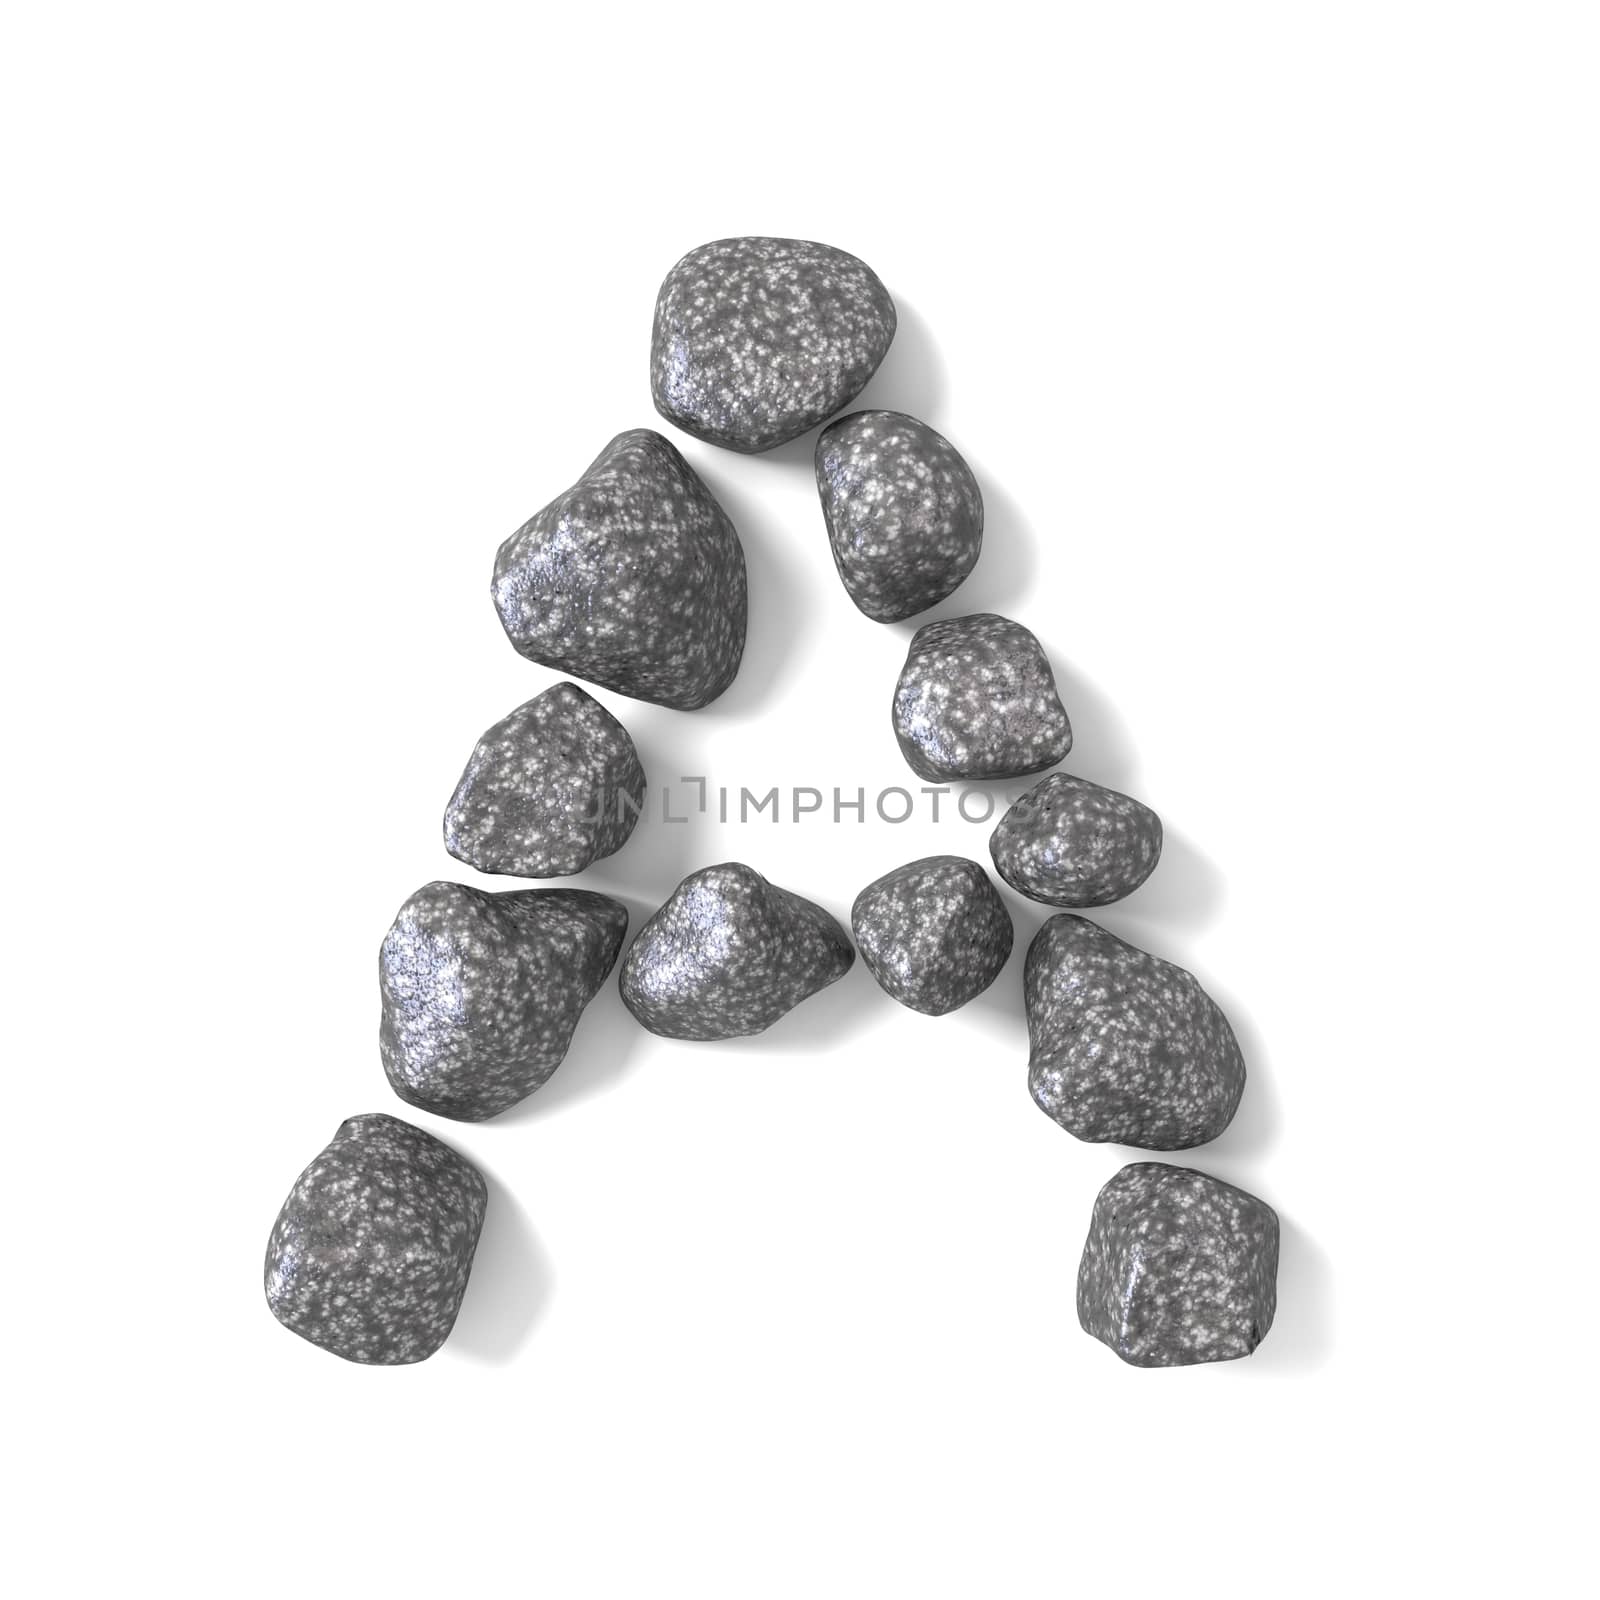 Font made of rocks LETTER A 3D render illustration isolated on white background